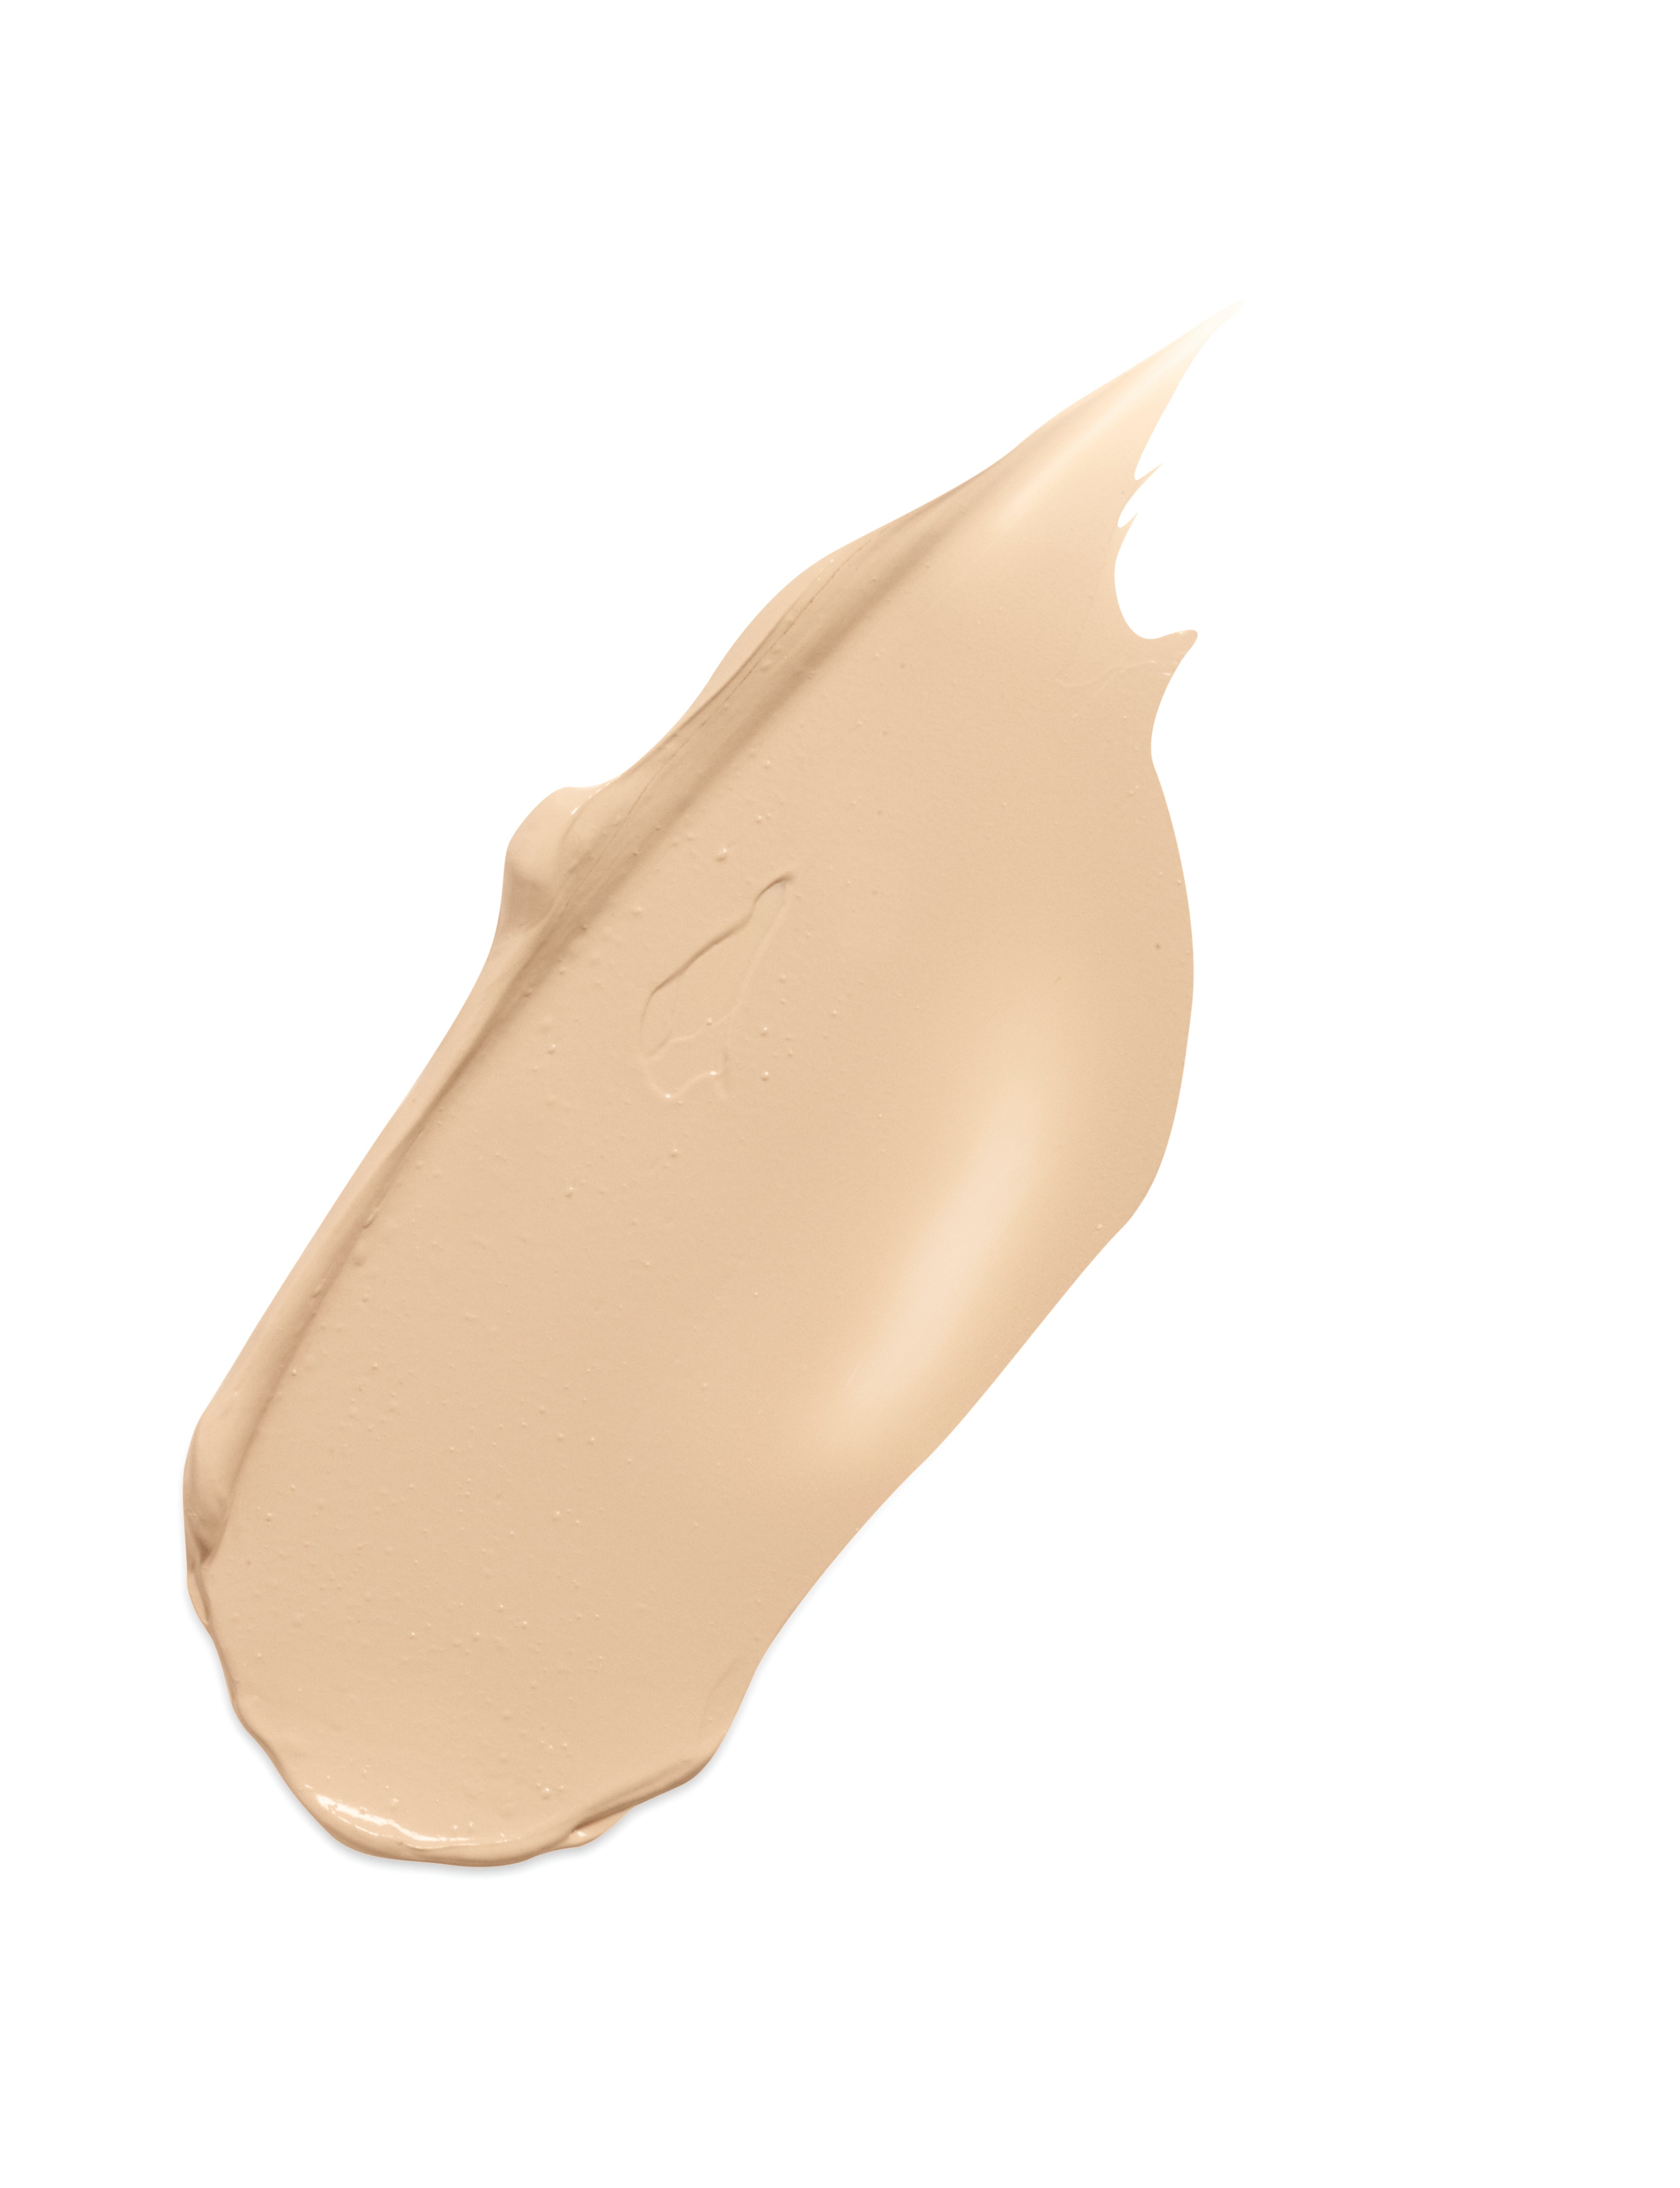 Jane Iredale Disappear Concealer